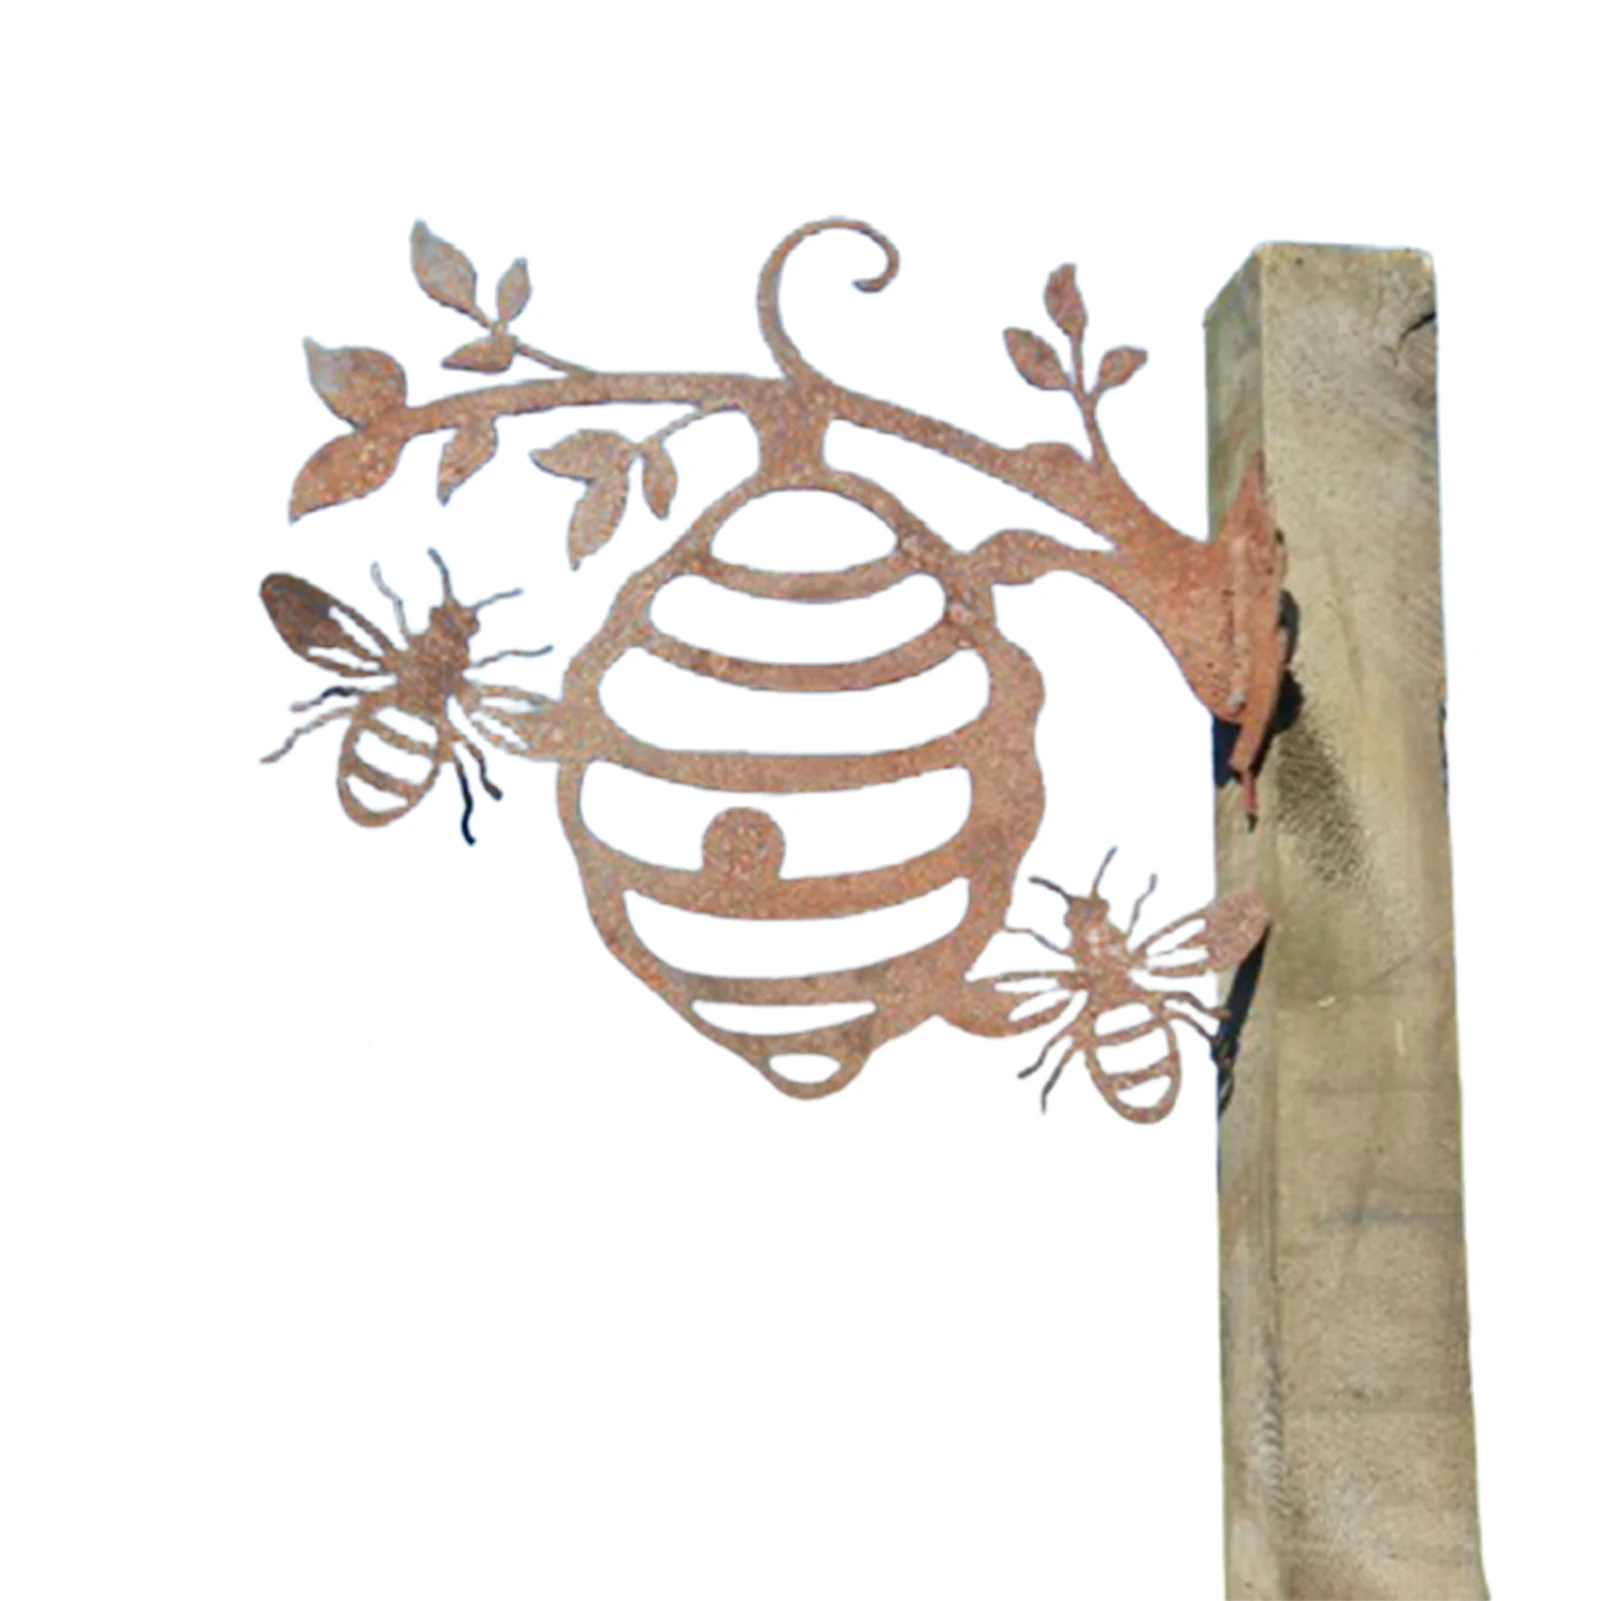 

Father's Day Gift Bee Hive Garden Decor Iron Silhouettes Tree Plug-in Ornament Yard & Garden Decor Decorative Stakes 38x36